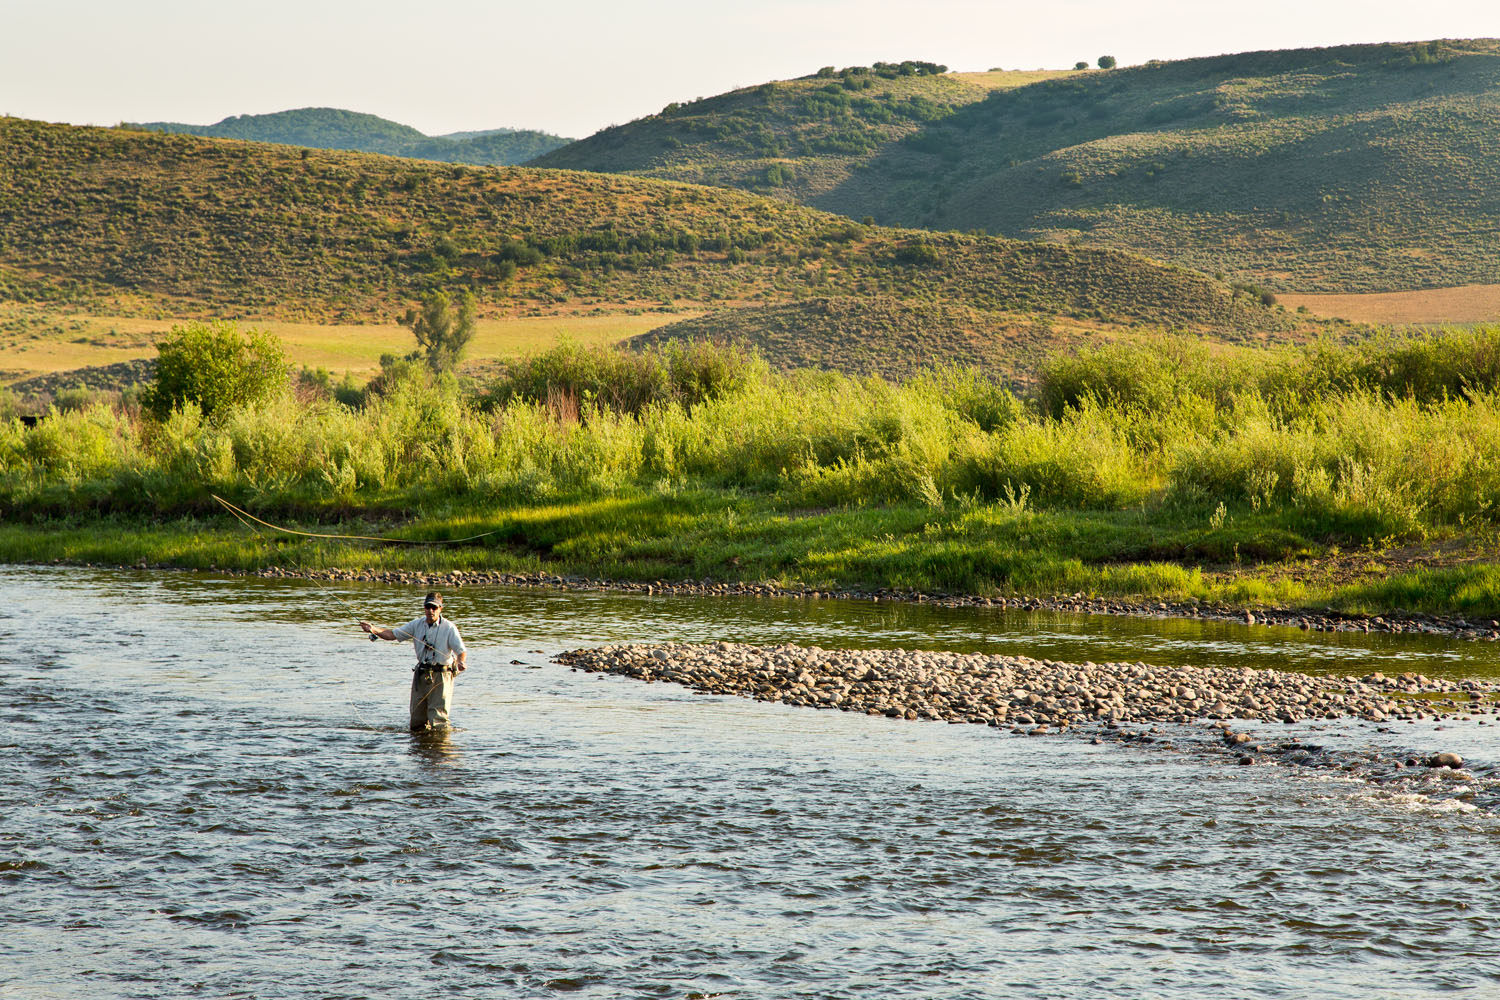  Lifestyle: Peter Sheetz fly fishing on the Yampa River near Steamboat, Colorado 